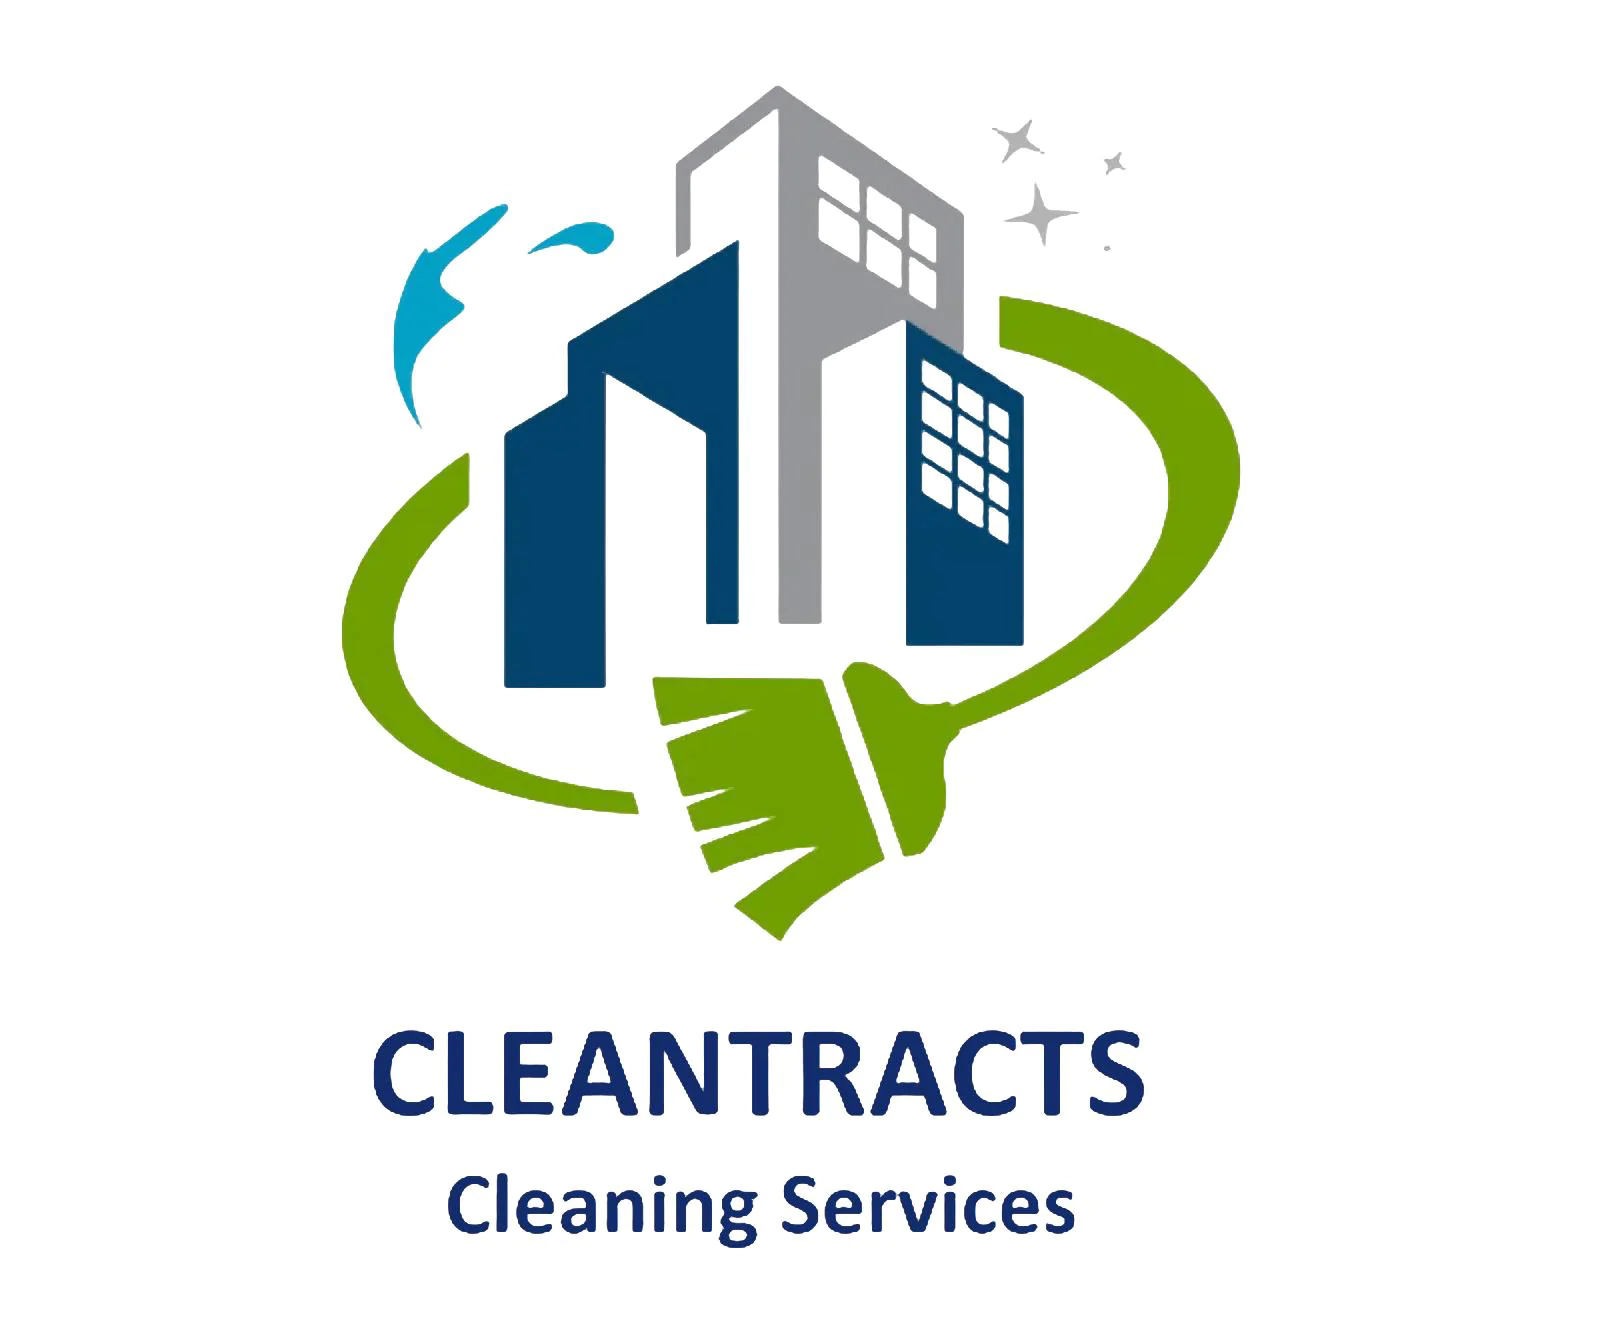 Cleantracts cleaning Services Logo